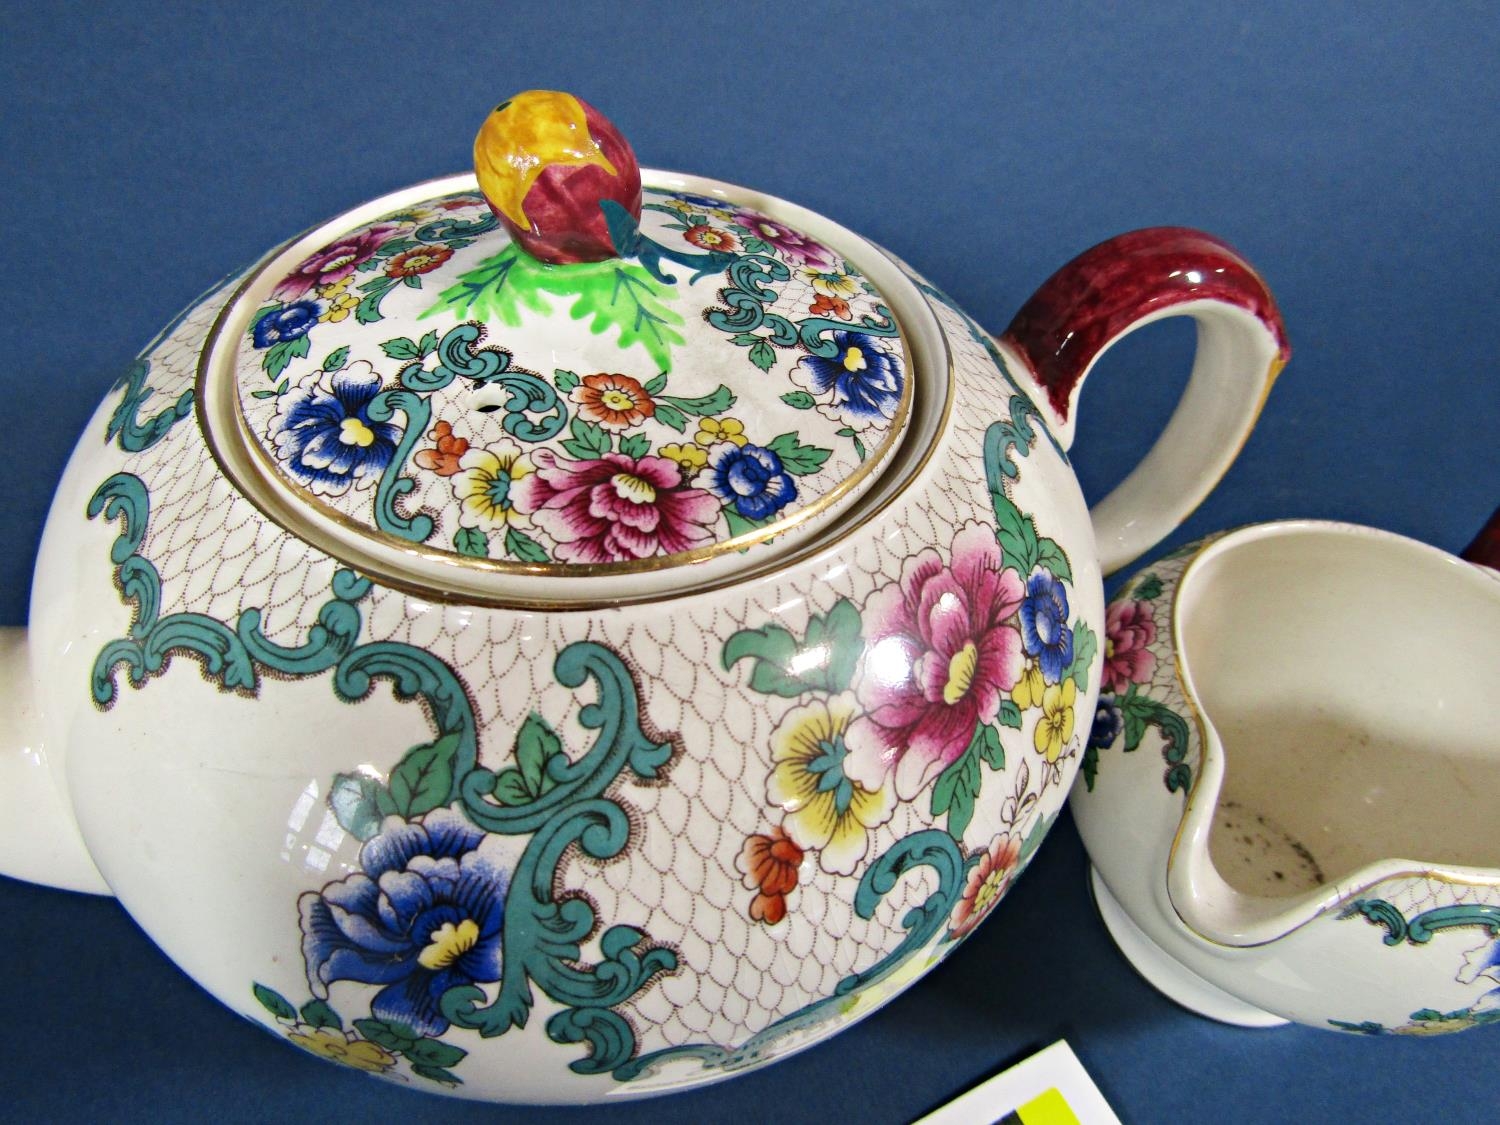 An extensive of Royal Cauldon Victoria and Booth's Flora Dora ware comprising tea cups, saucers, - Image 3 of 6